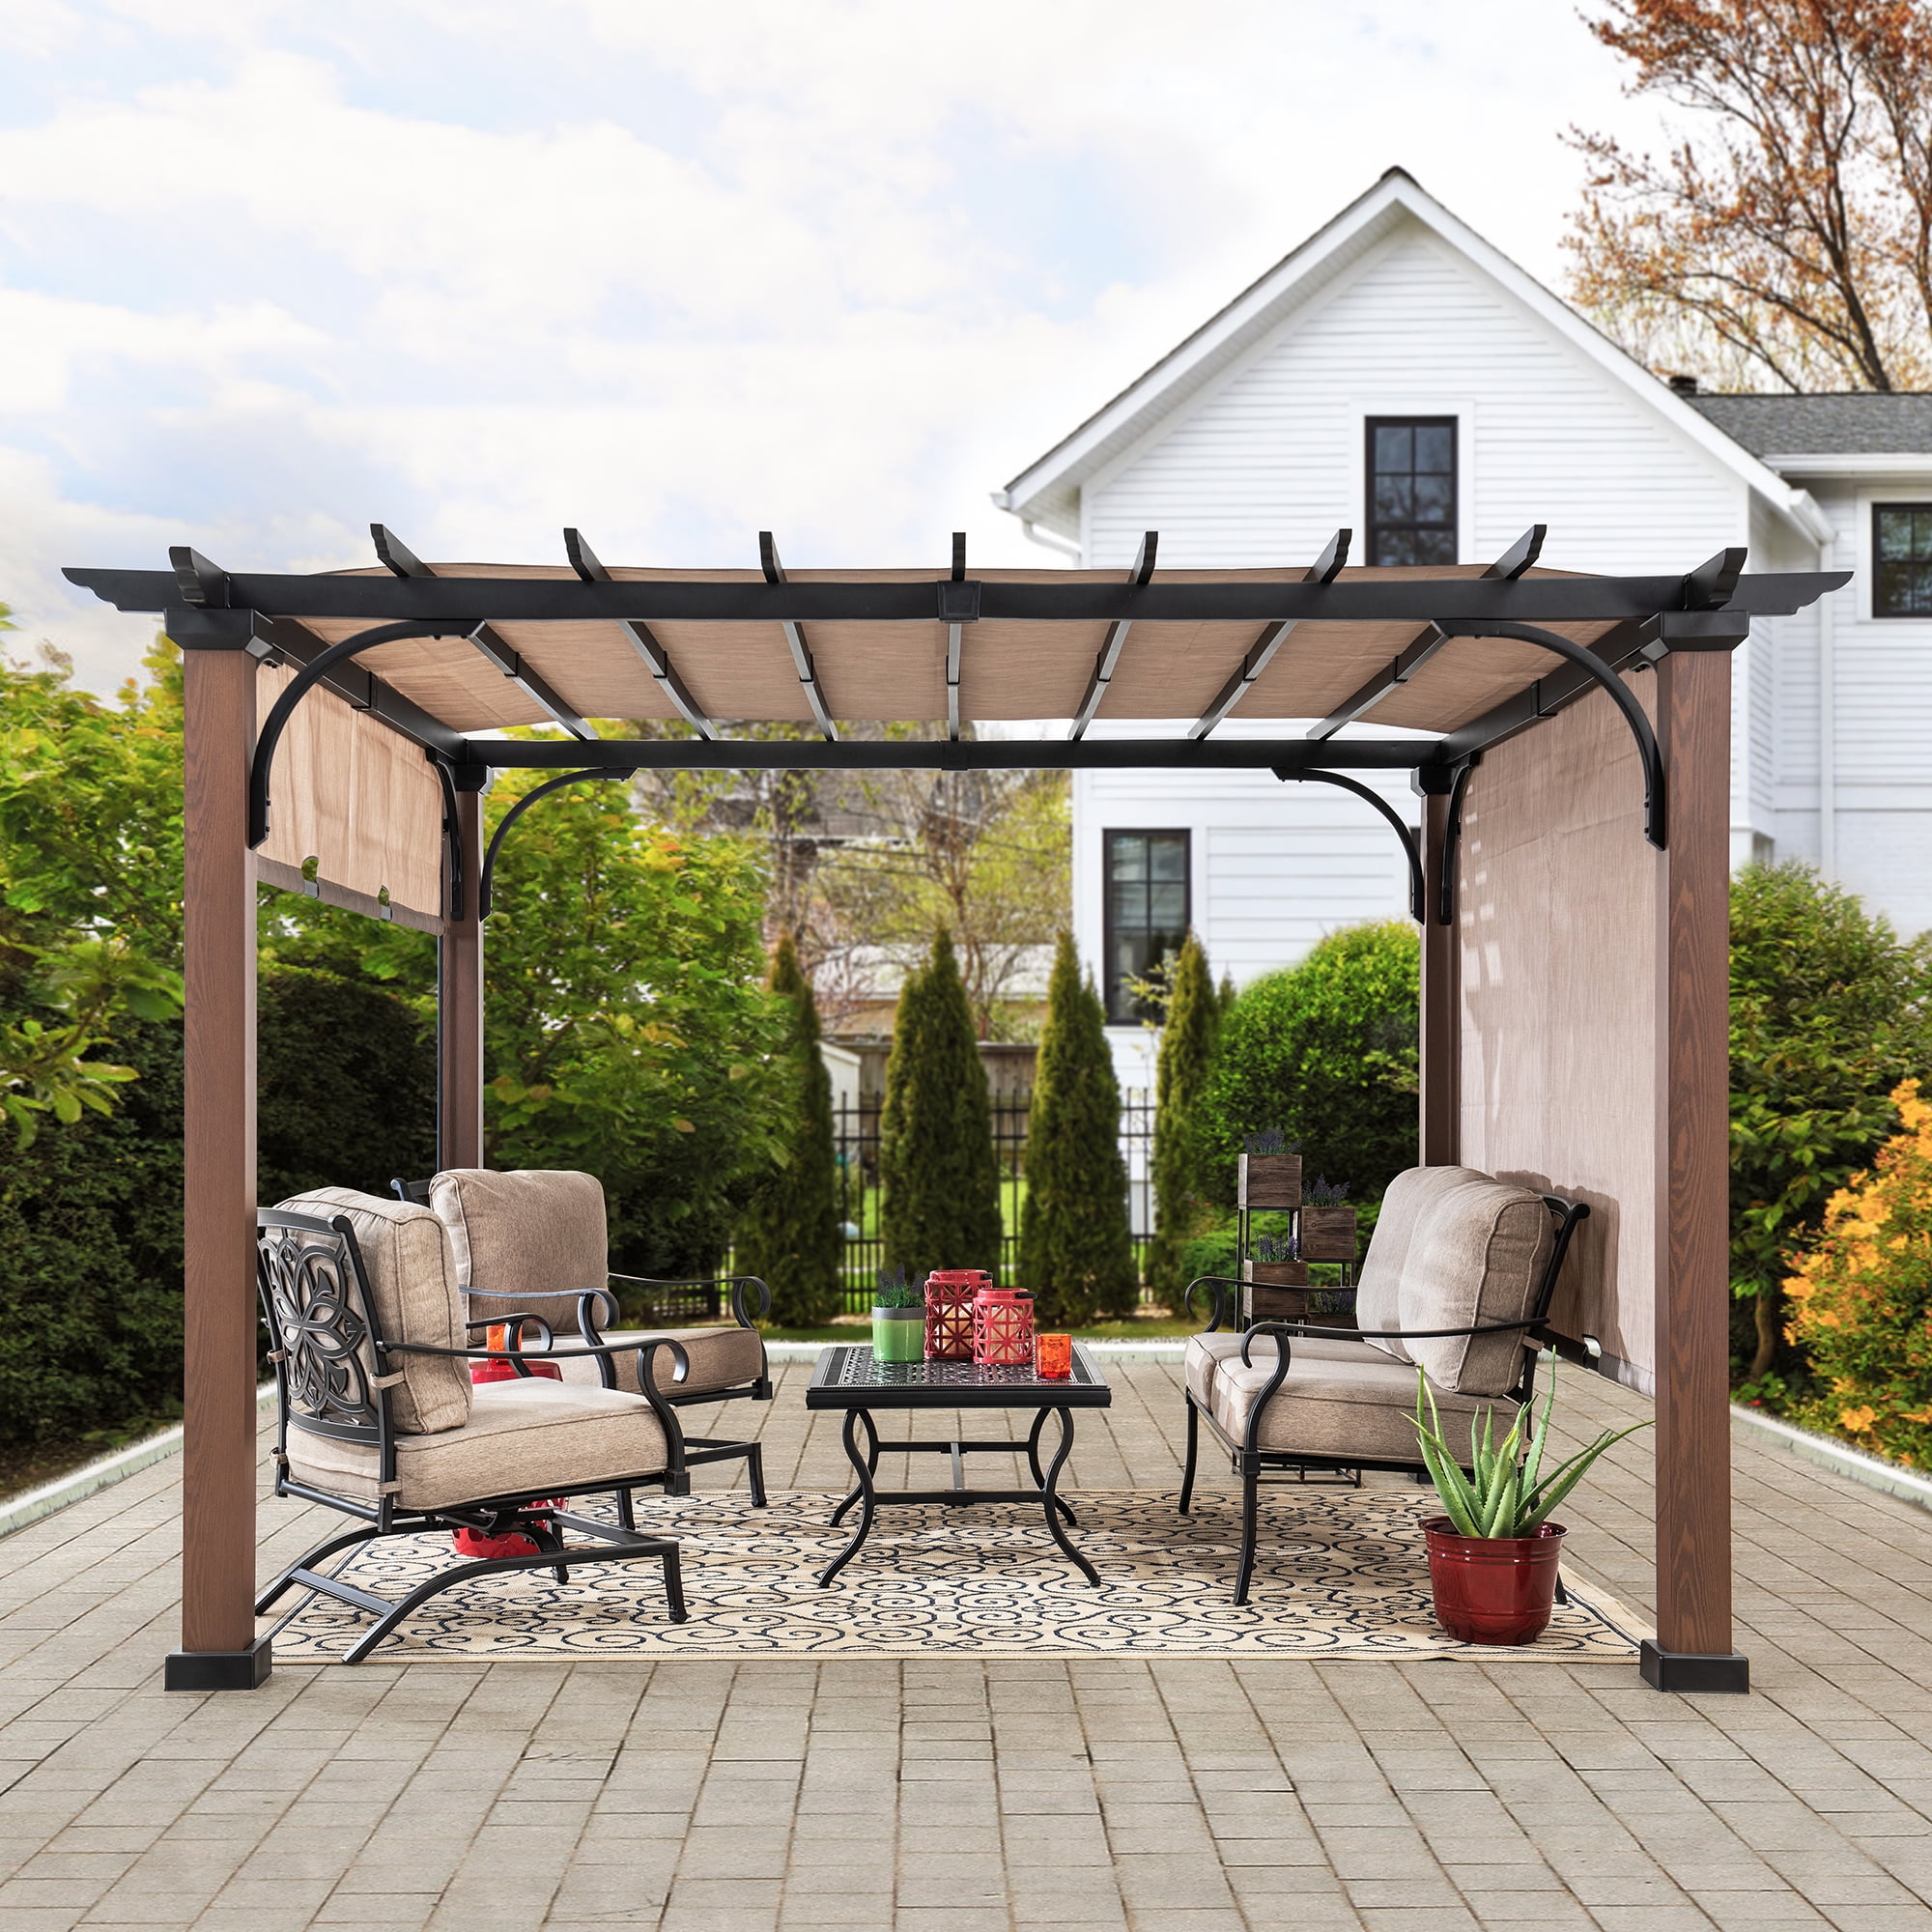 Sunjoy 11 x 11 ft. Metal Pergola with Natural Wood Looking Finish and ...